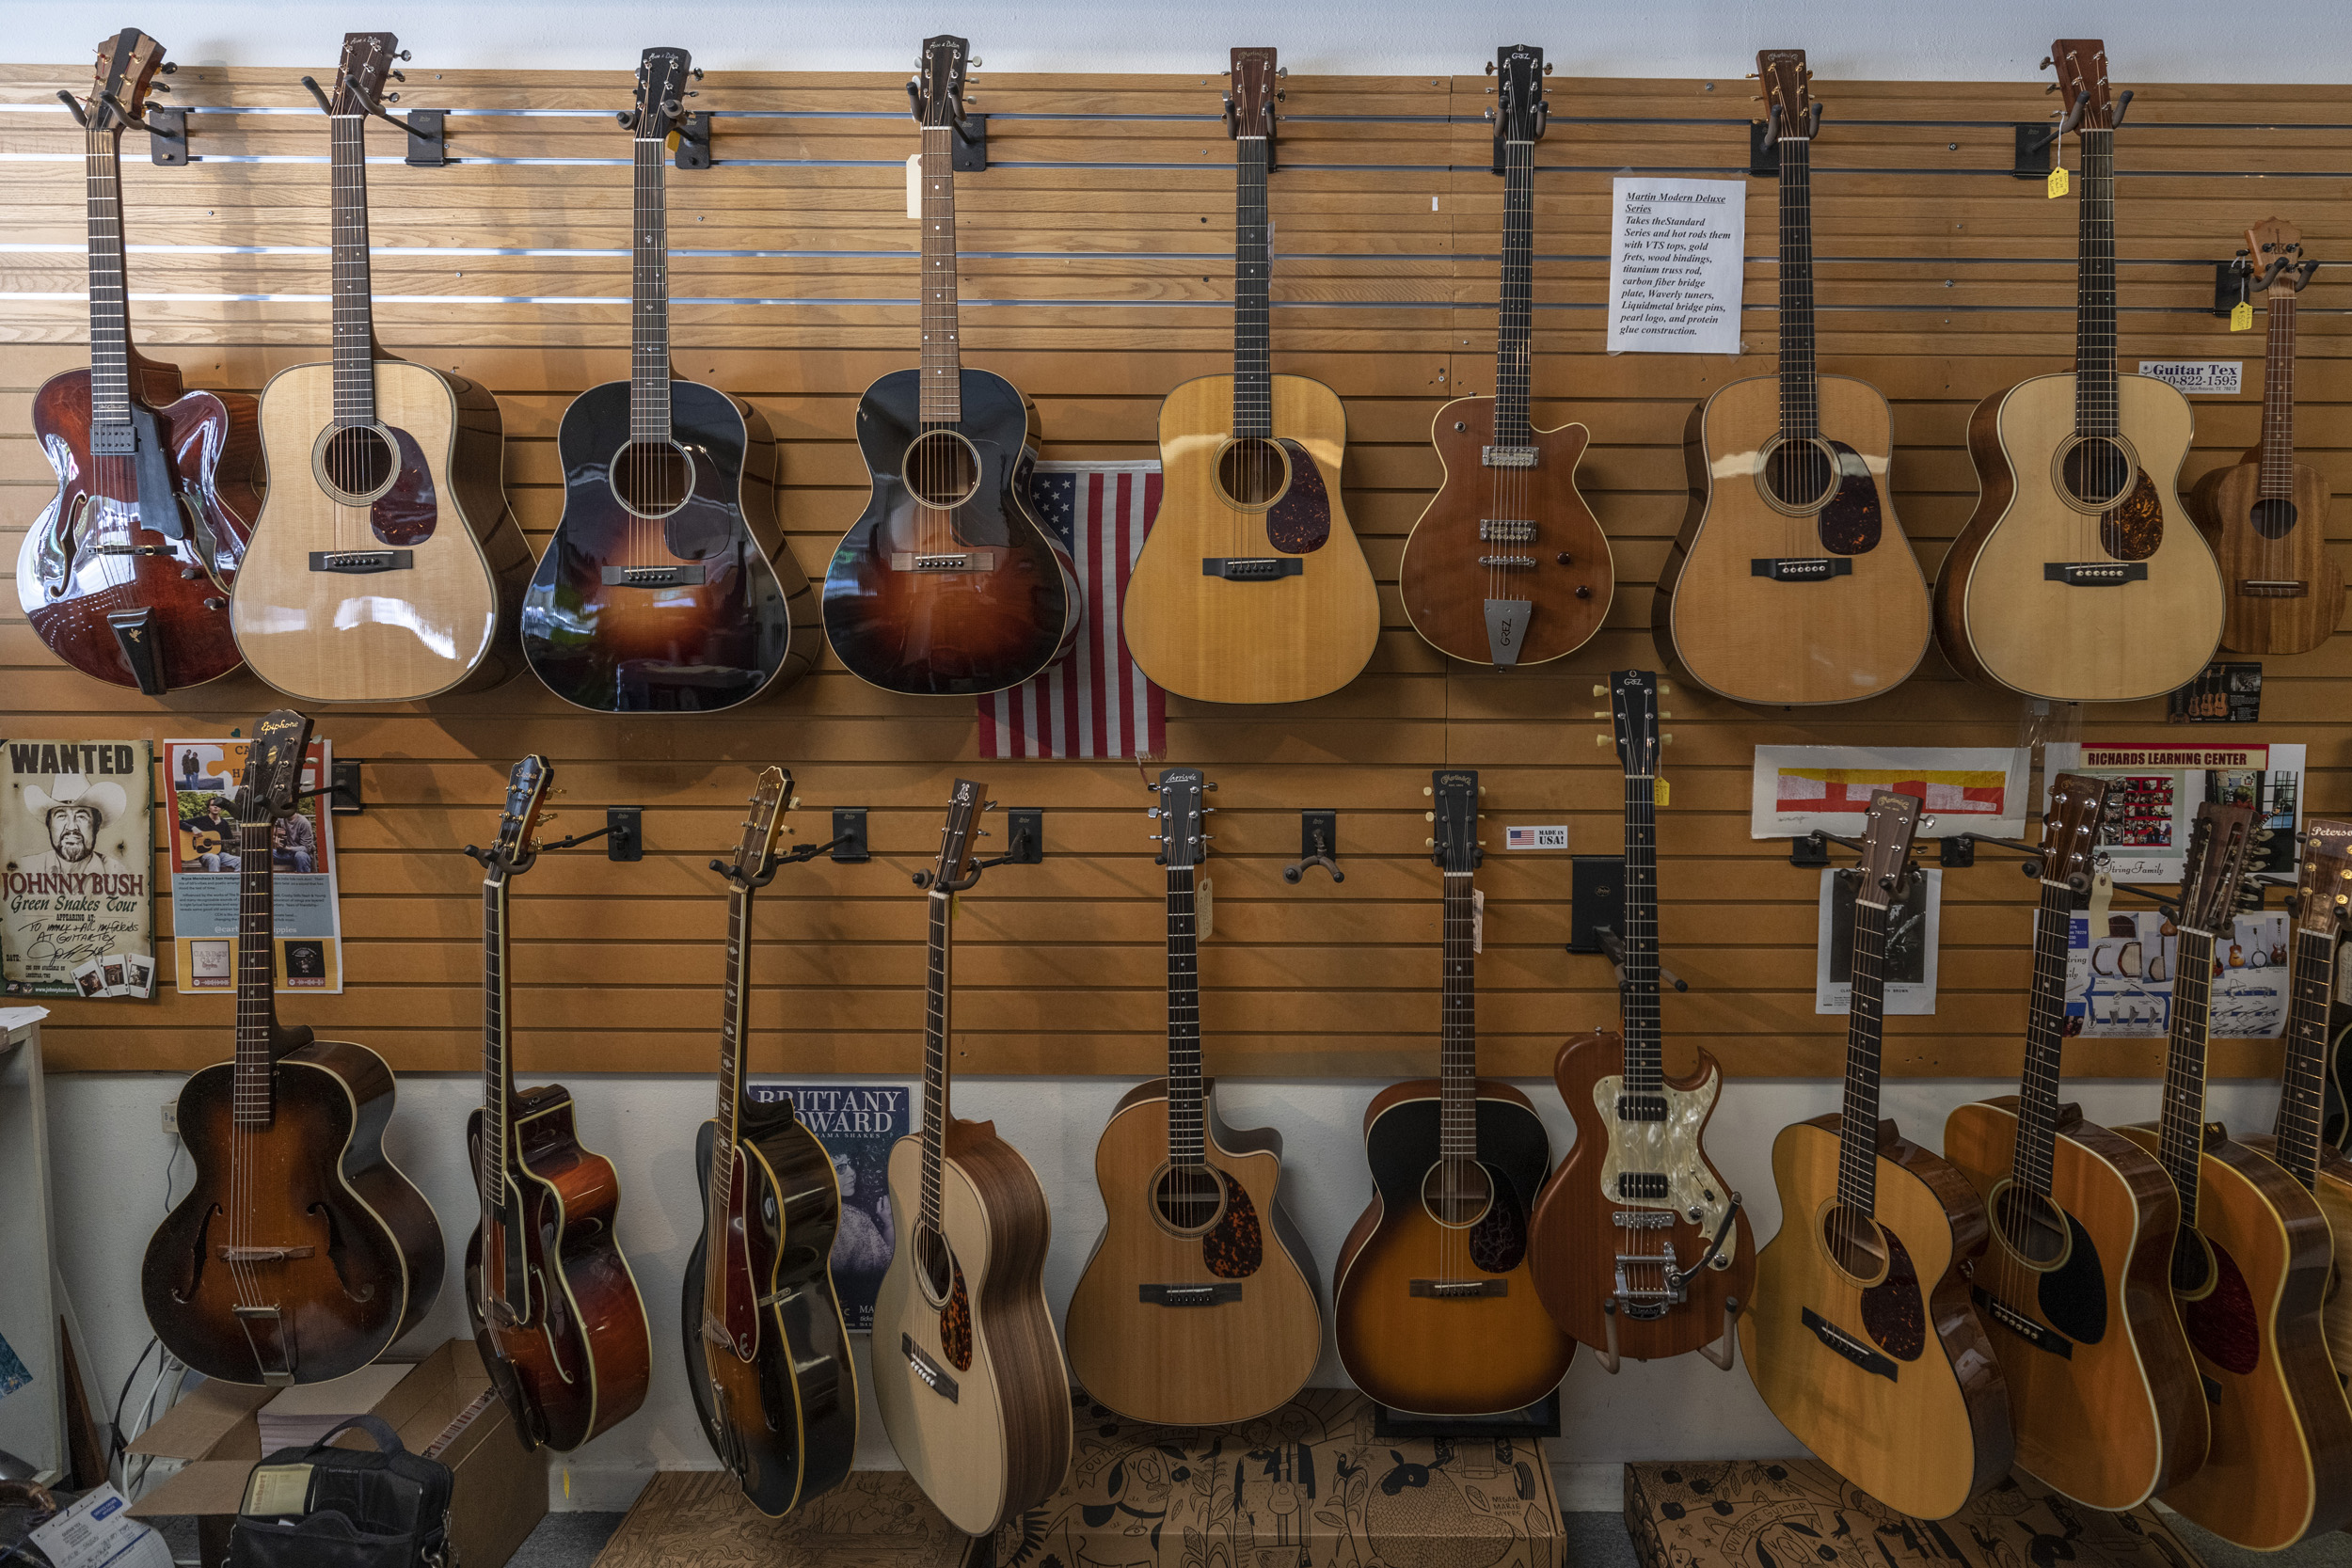 Inventory | Guitar Tex: The Best Guitar in Texas